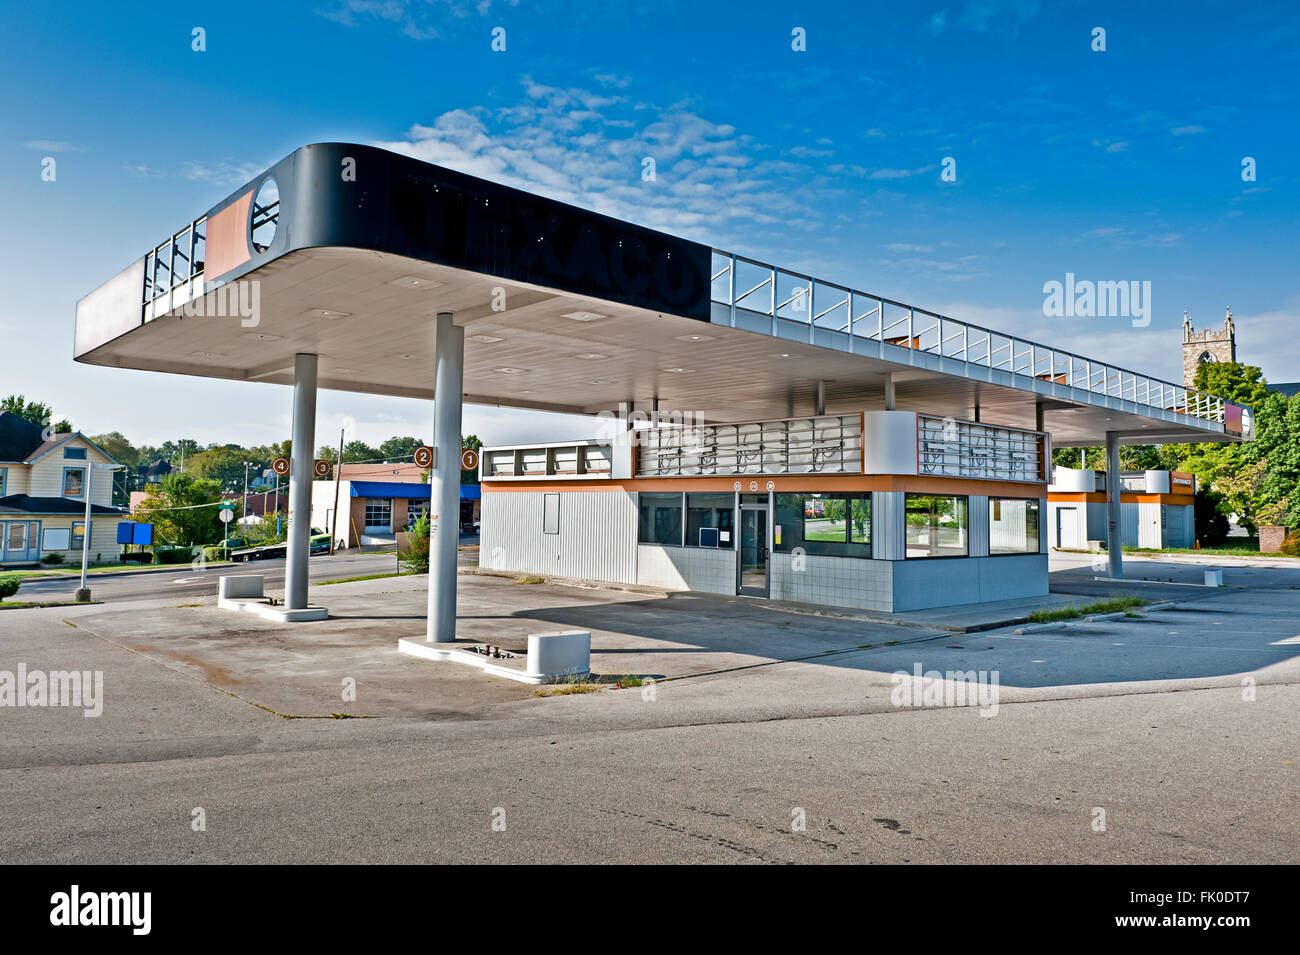 Gas Station Convenience Store Out of Business Stock Photo